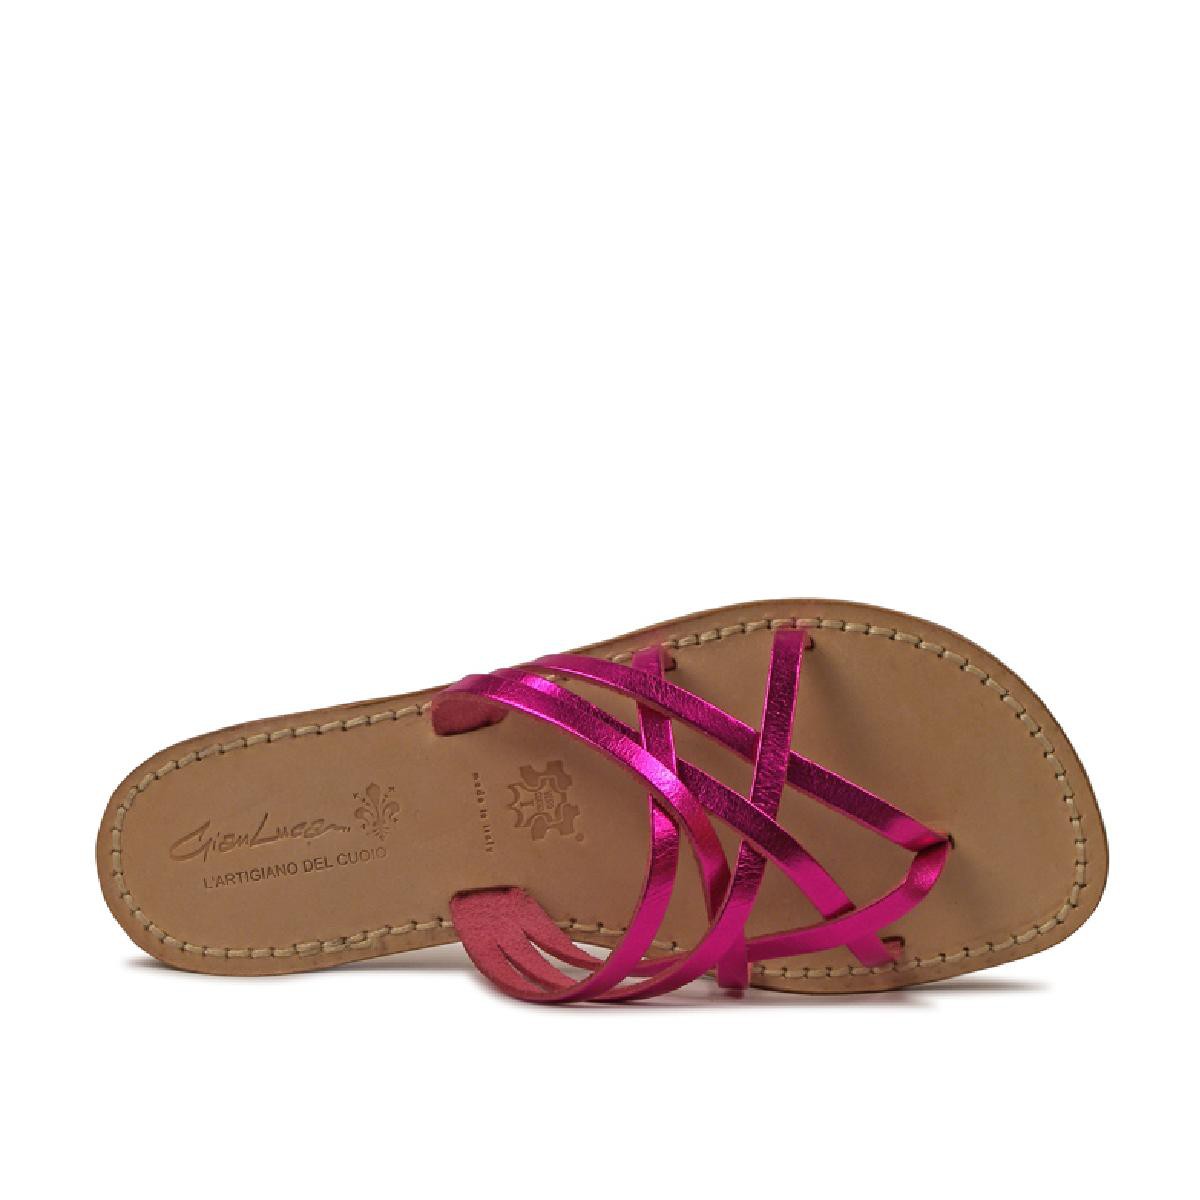 Ladies thong slippers in fuchsia laminated leather | The leather craftsmen